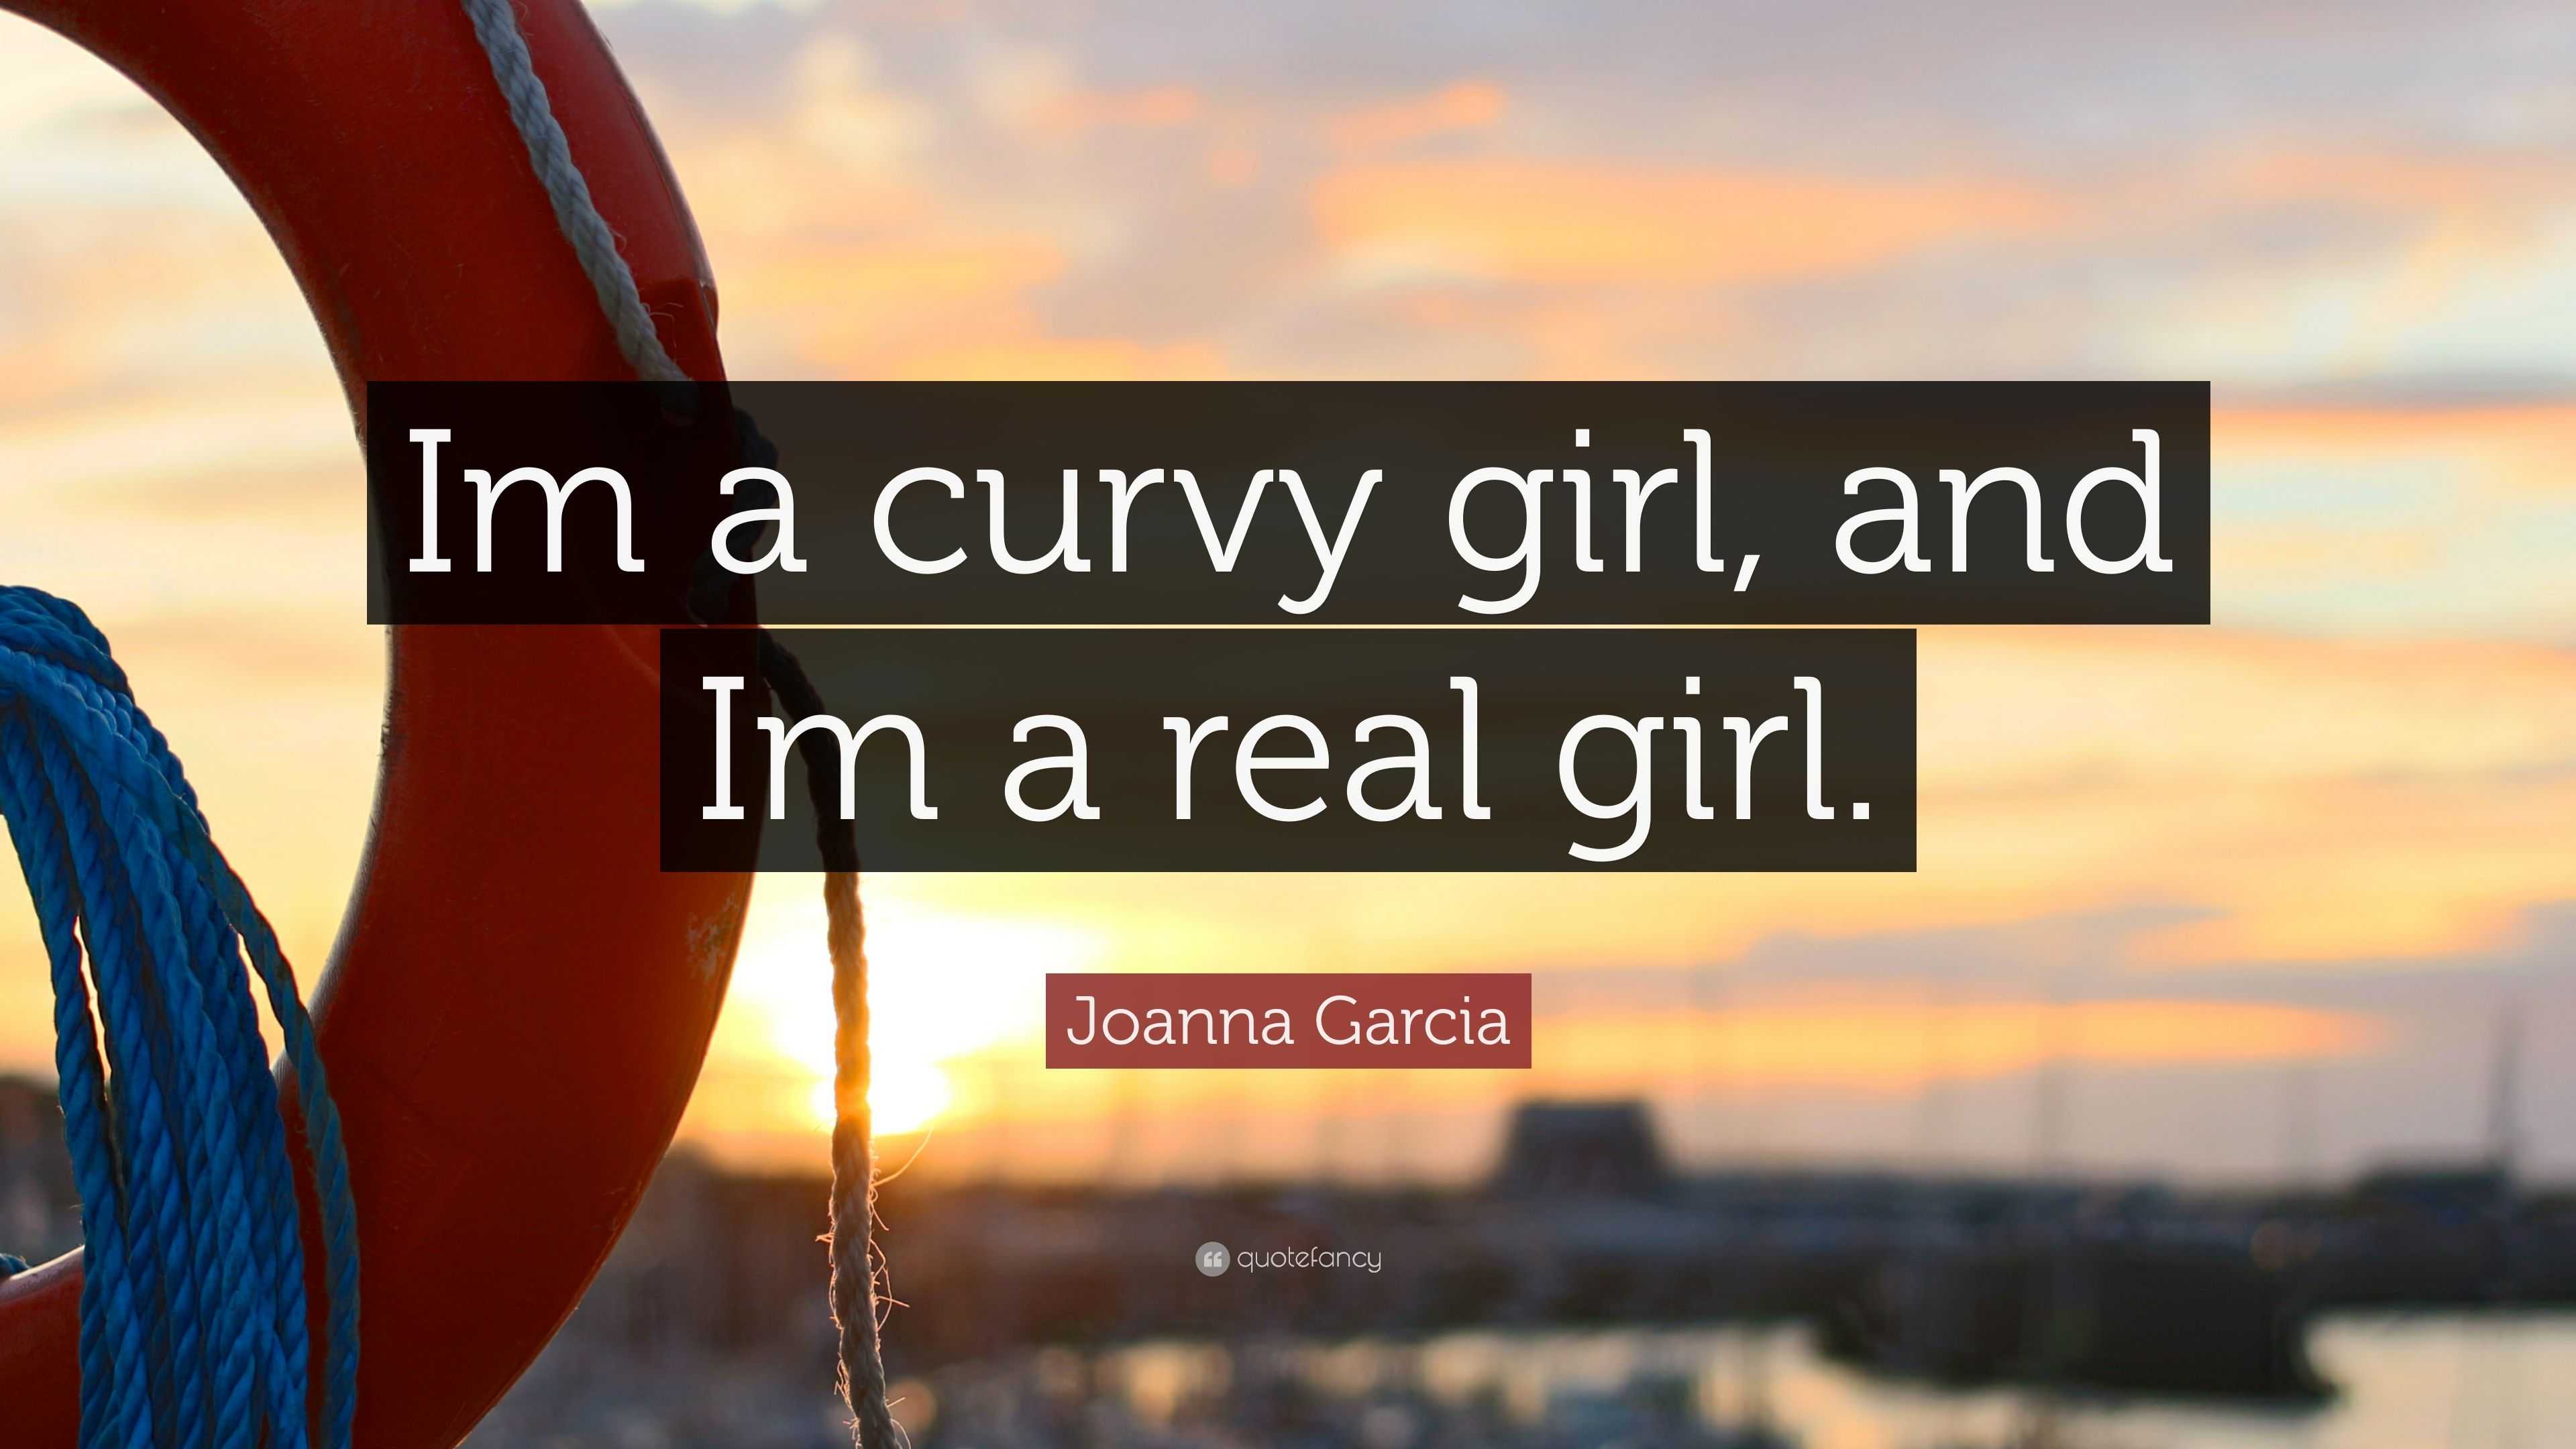 Joanna Garcia Quote: “Im a curvy girl, and Im a real girl.”